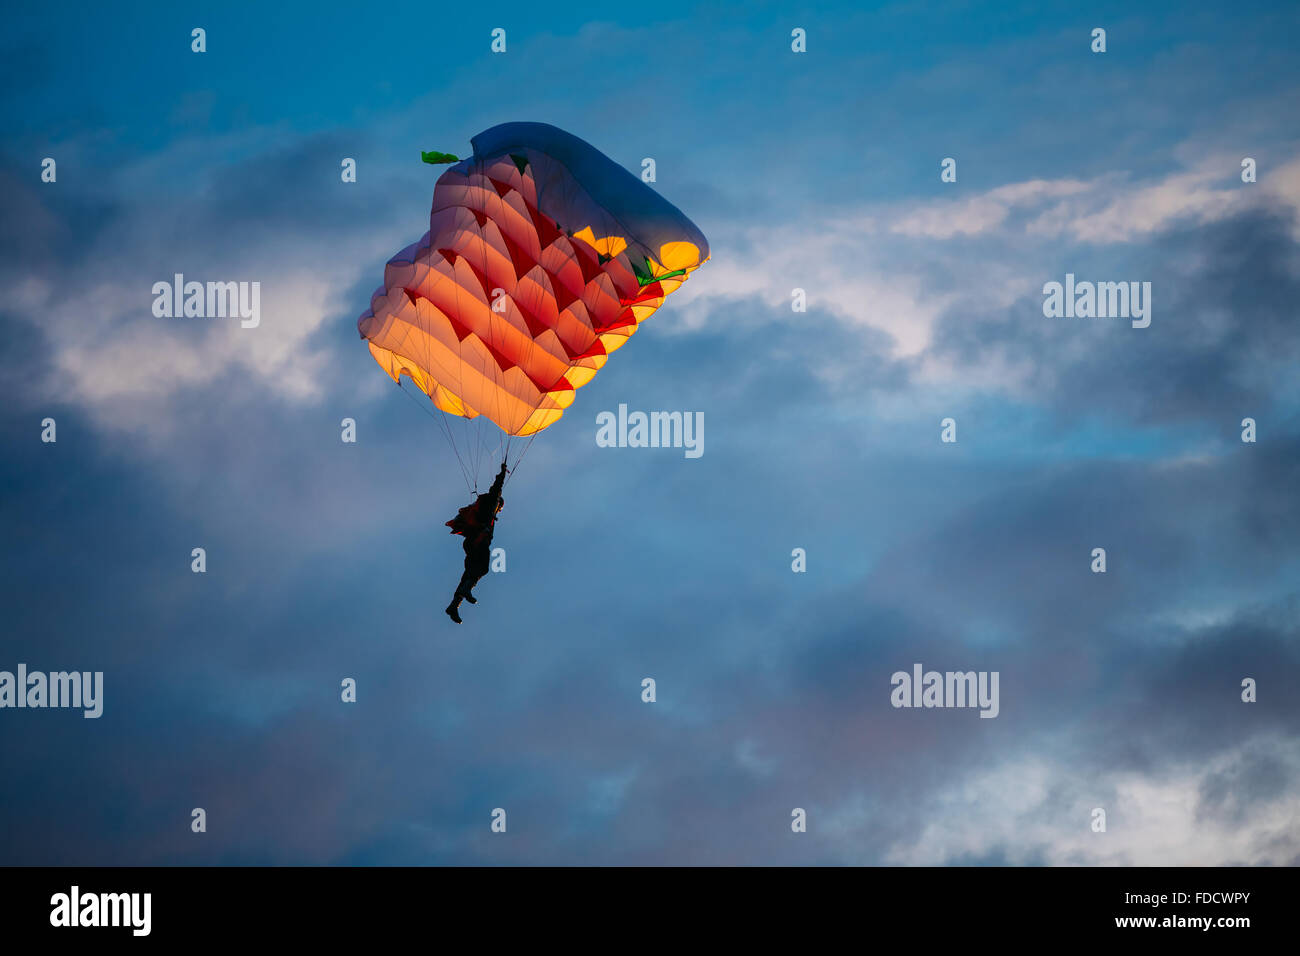 Skydiver On Colorful Parachute In Sky. Active Hobbies Stock Photo